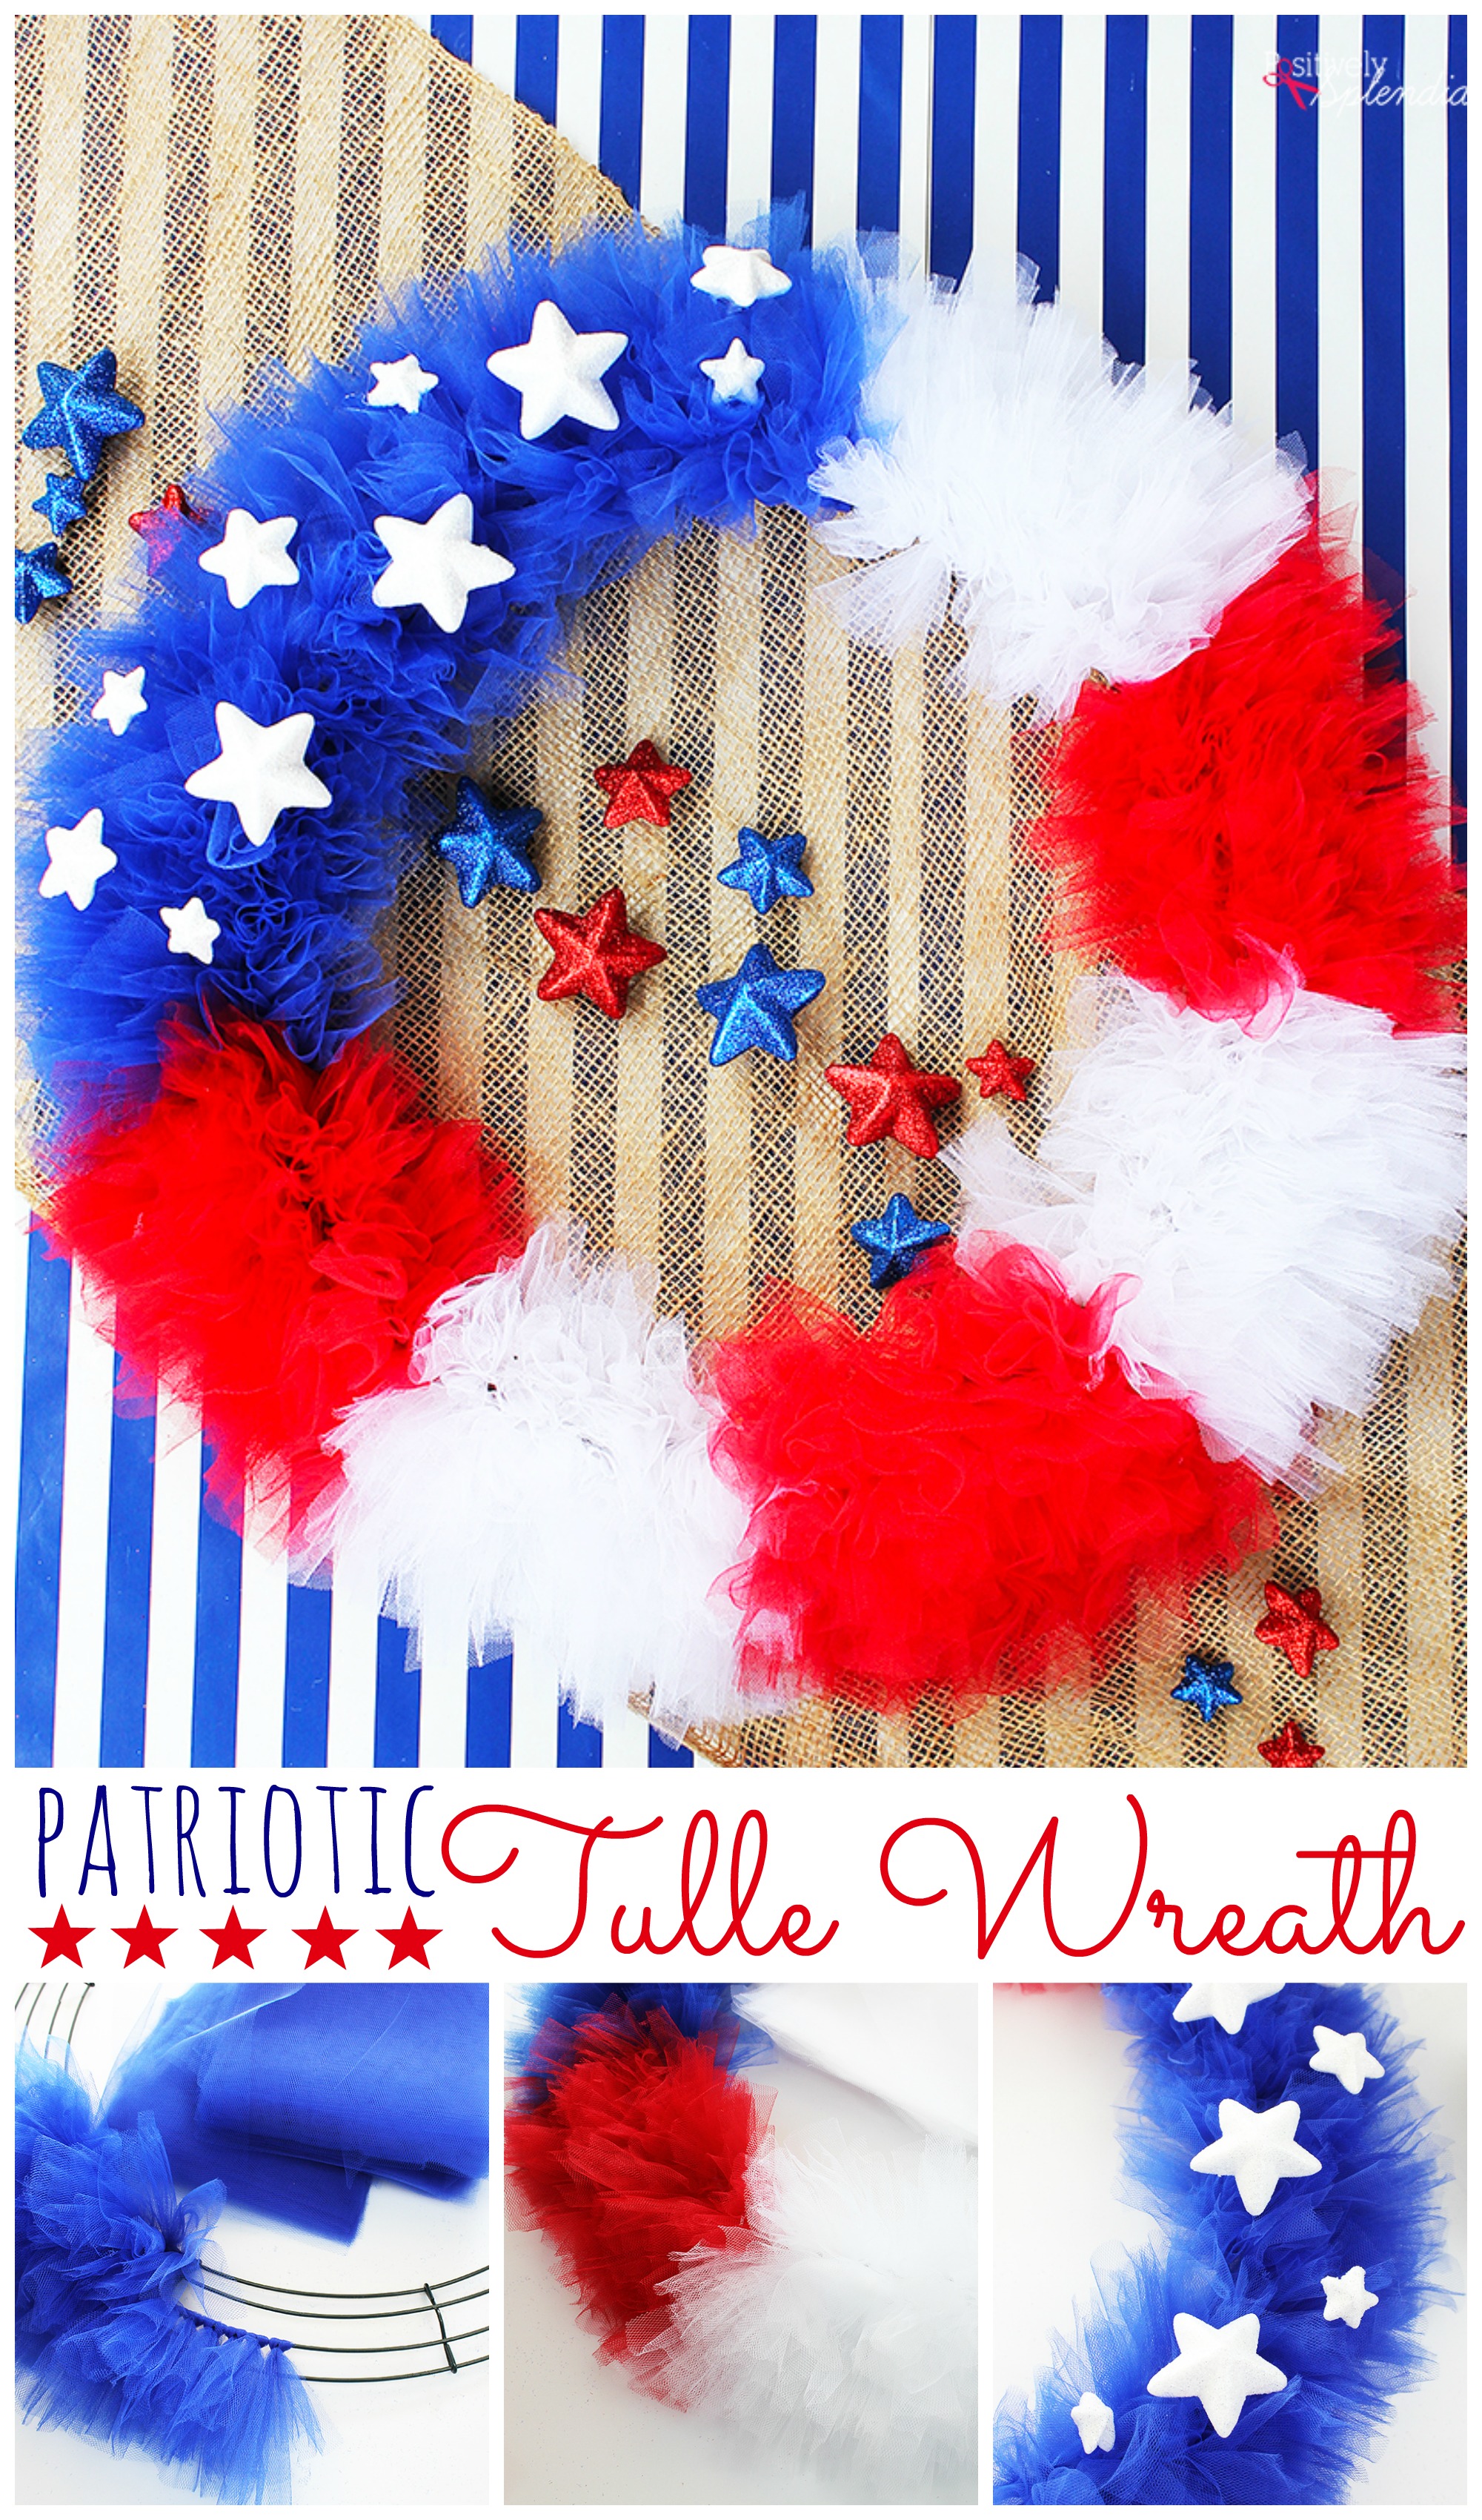 Patriotic Ribbon and Tulle Wreath - The Ribbon Retreat Blog